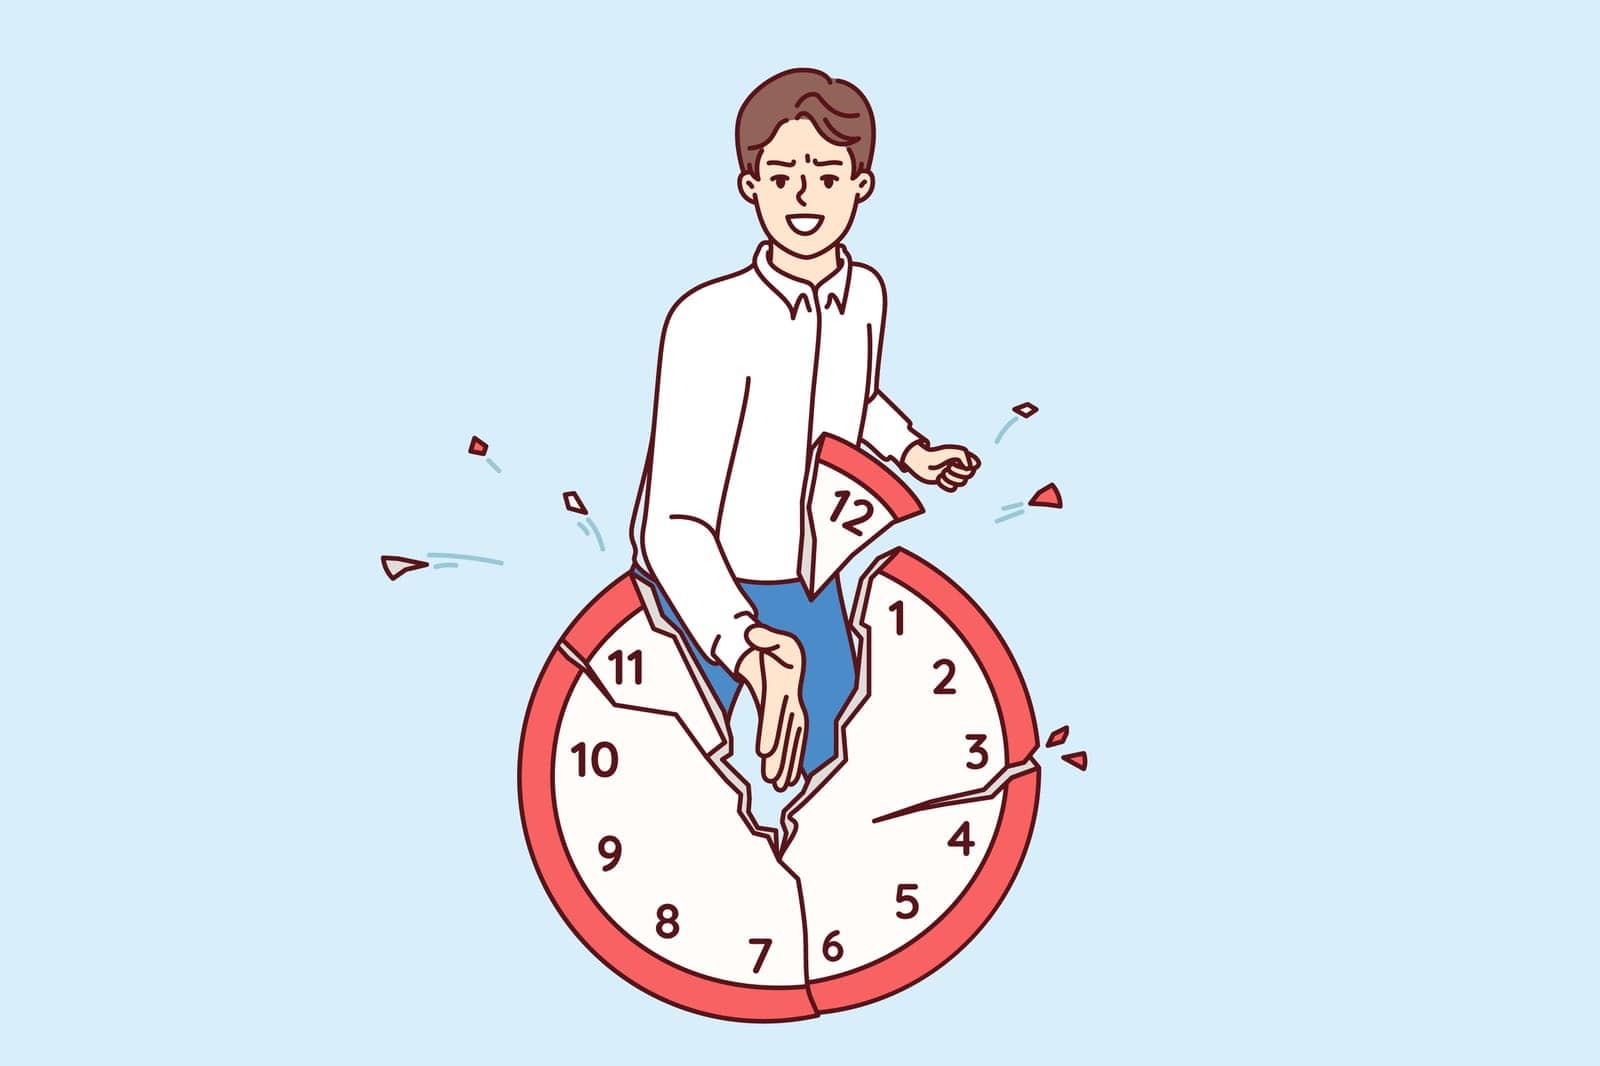 Man office worker breaks watch, refusing to comply with strict deadlines and follow company business schedule. Strong guy hits deadlines by meeting and exceeding productivity targets with ease.